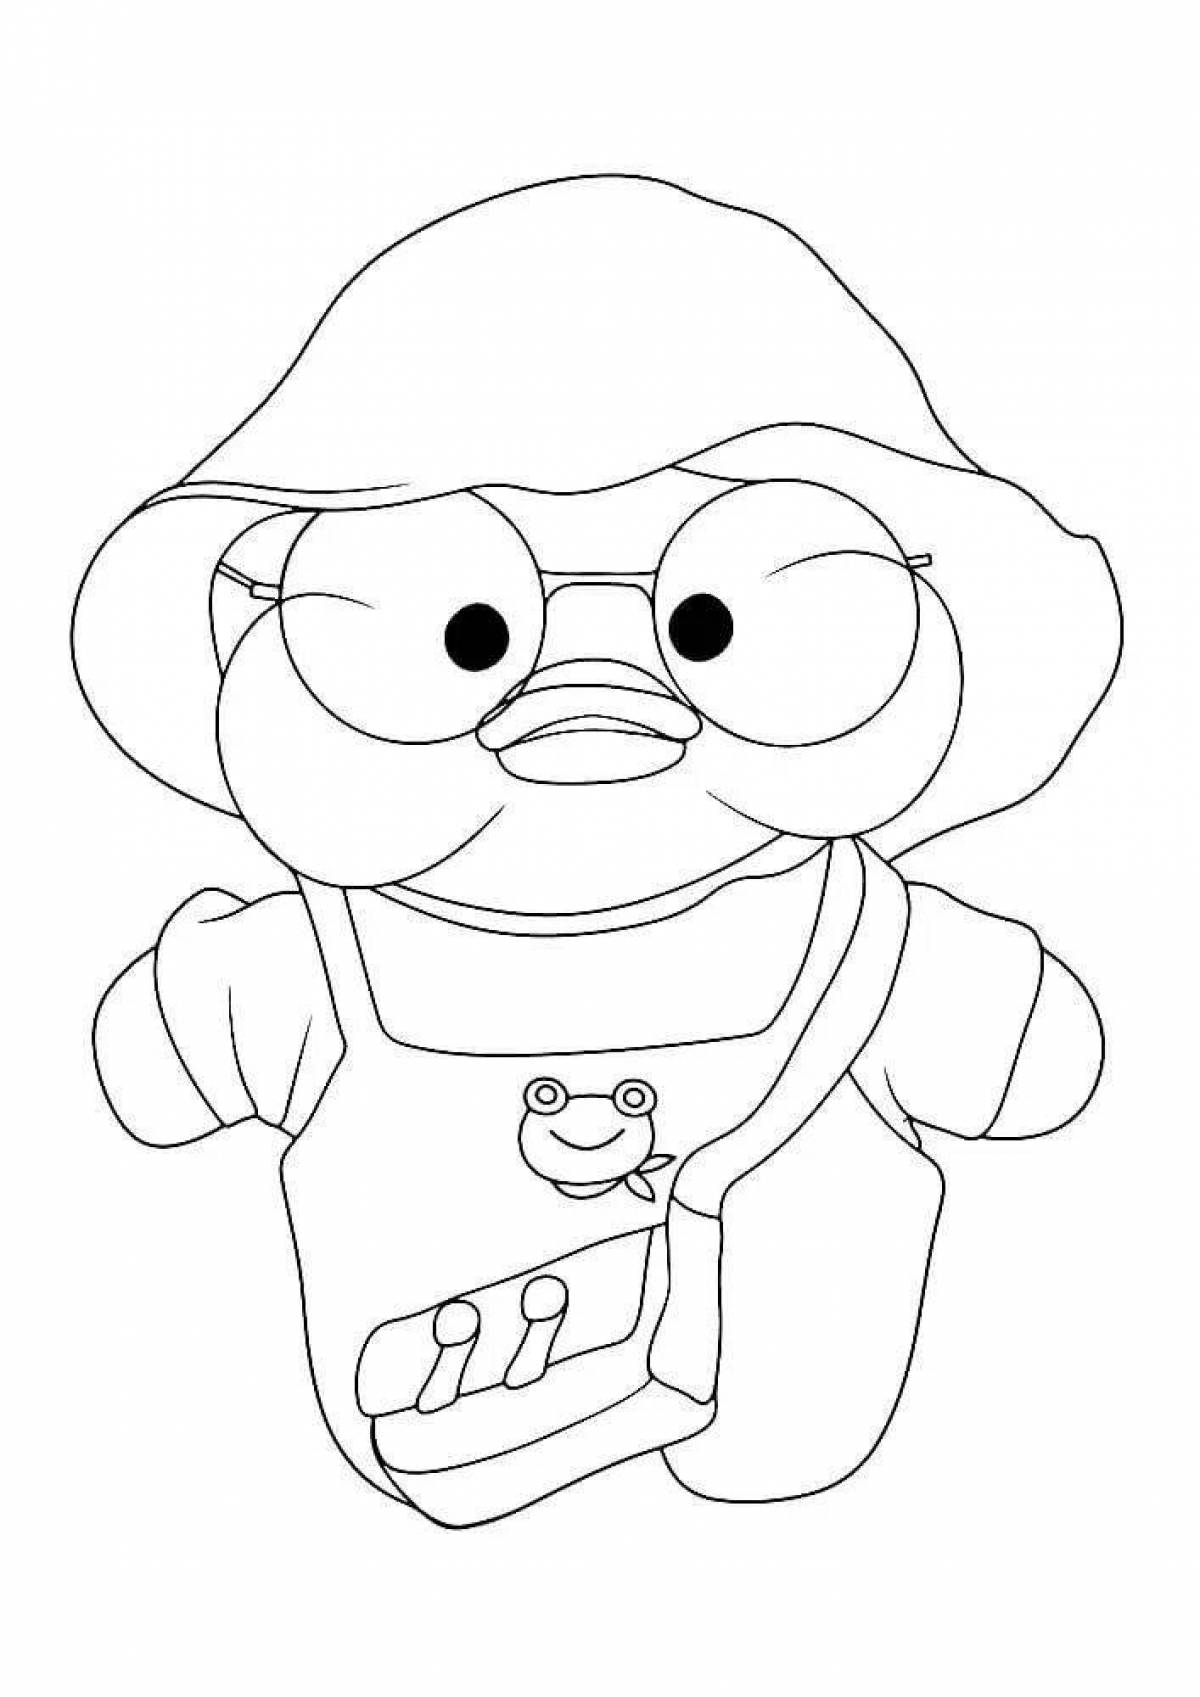 Lafanfan Duck Animated Coloring Page